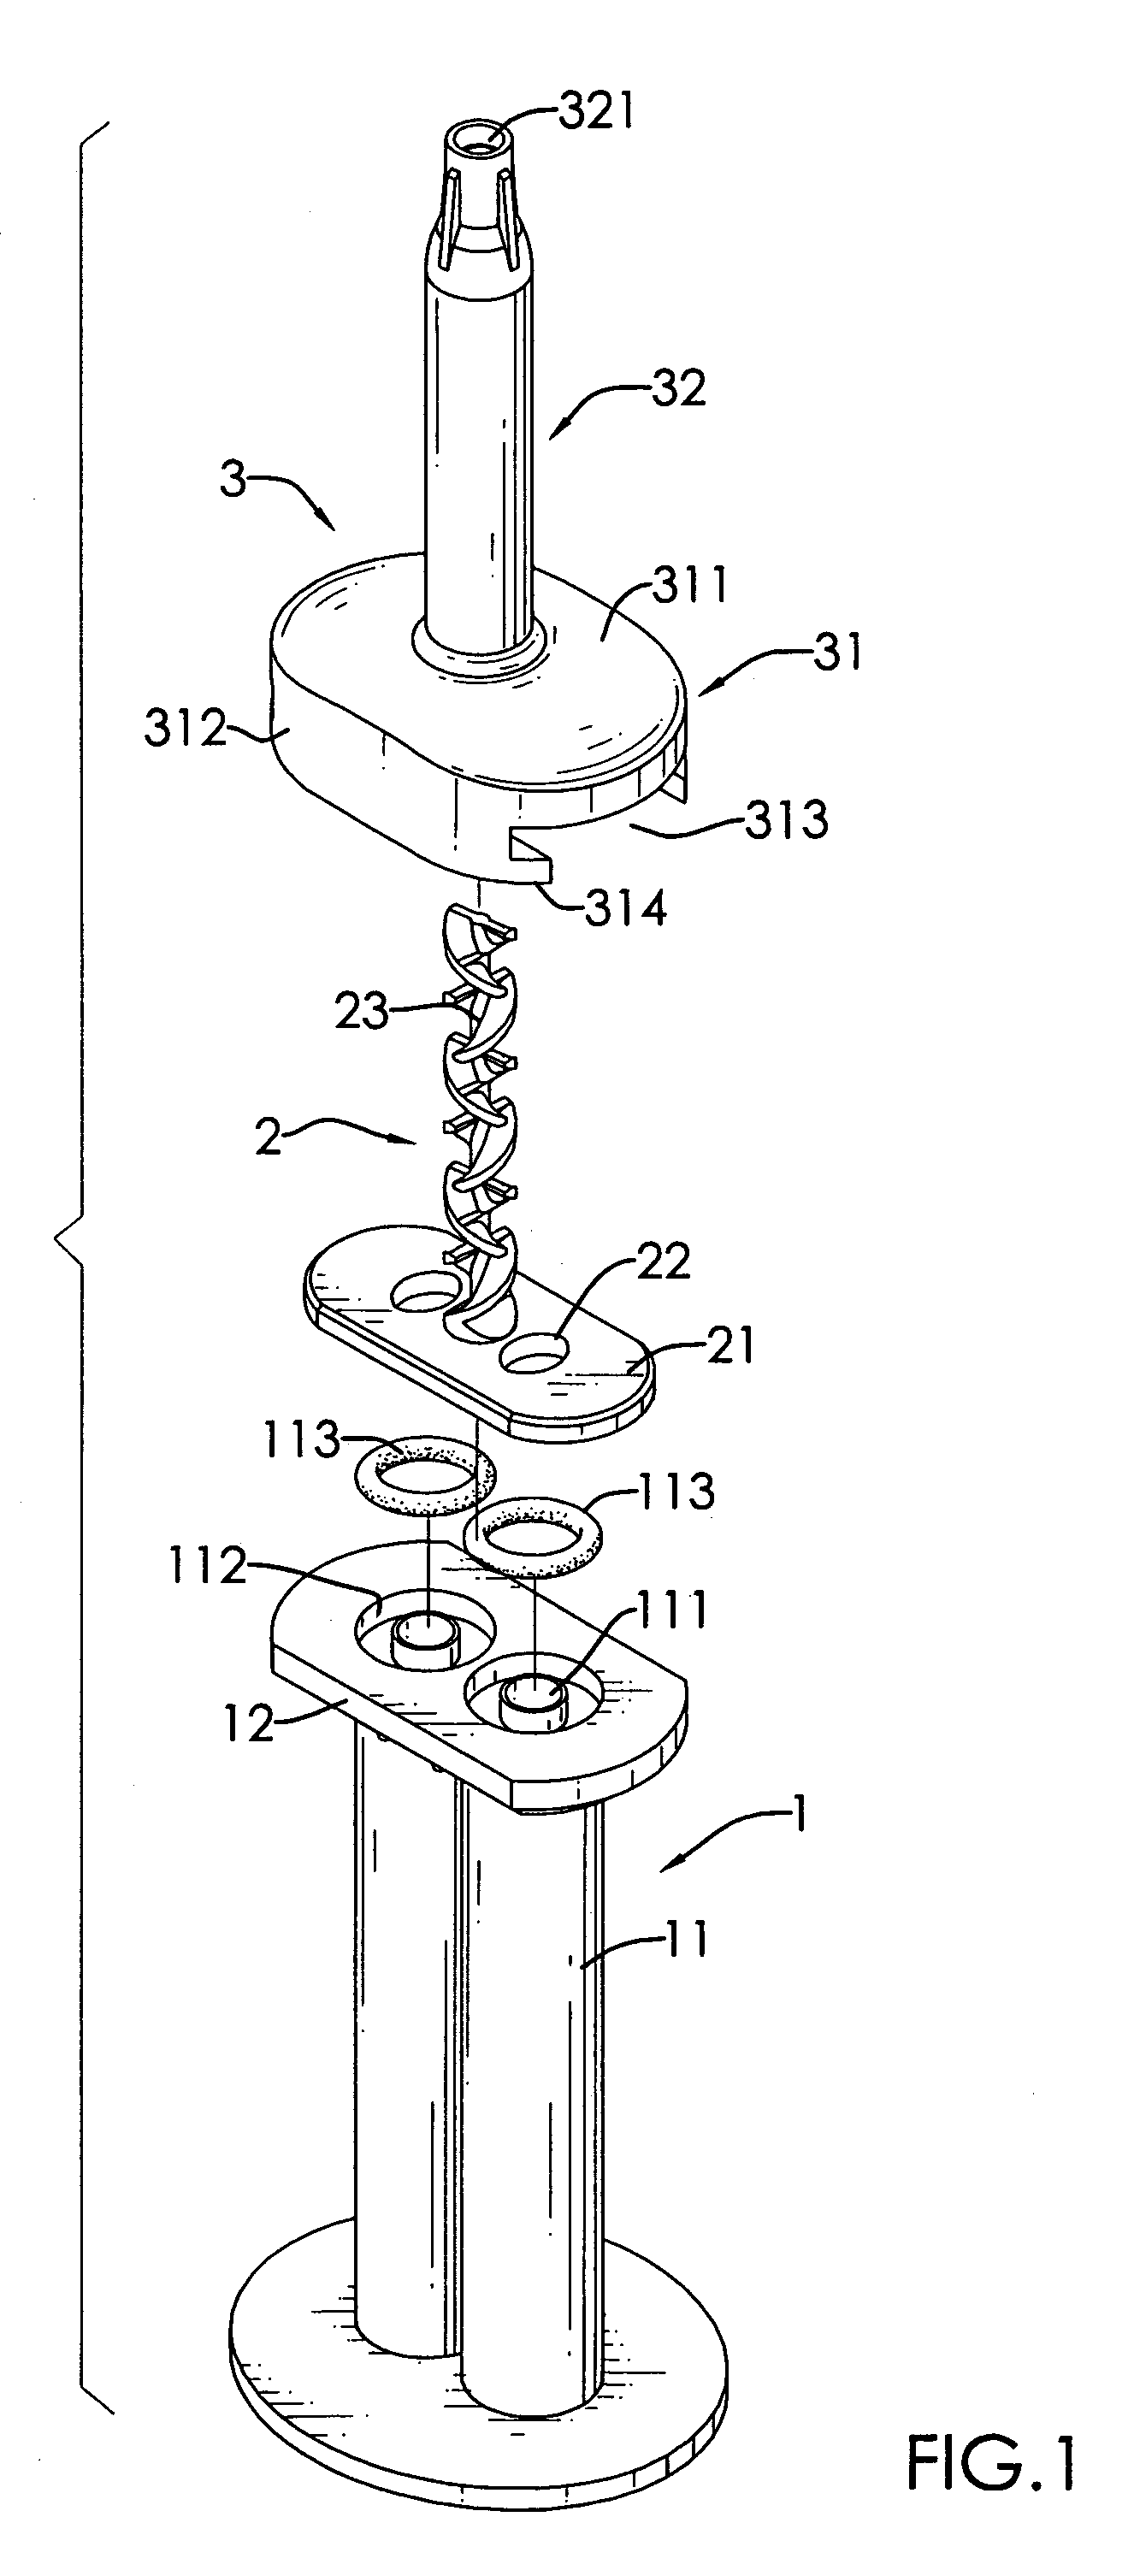 Slidable securing device for a mixer to allow communication between a mixer housing and a mixer inlet portion of the mixer